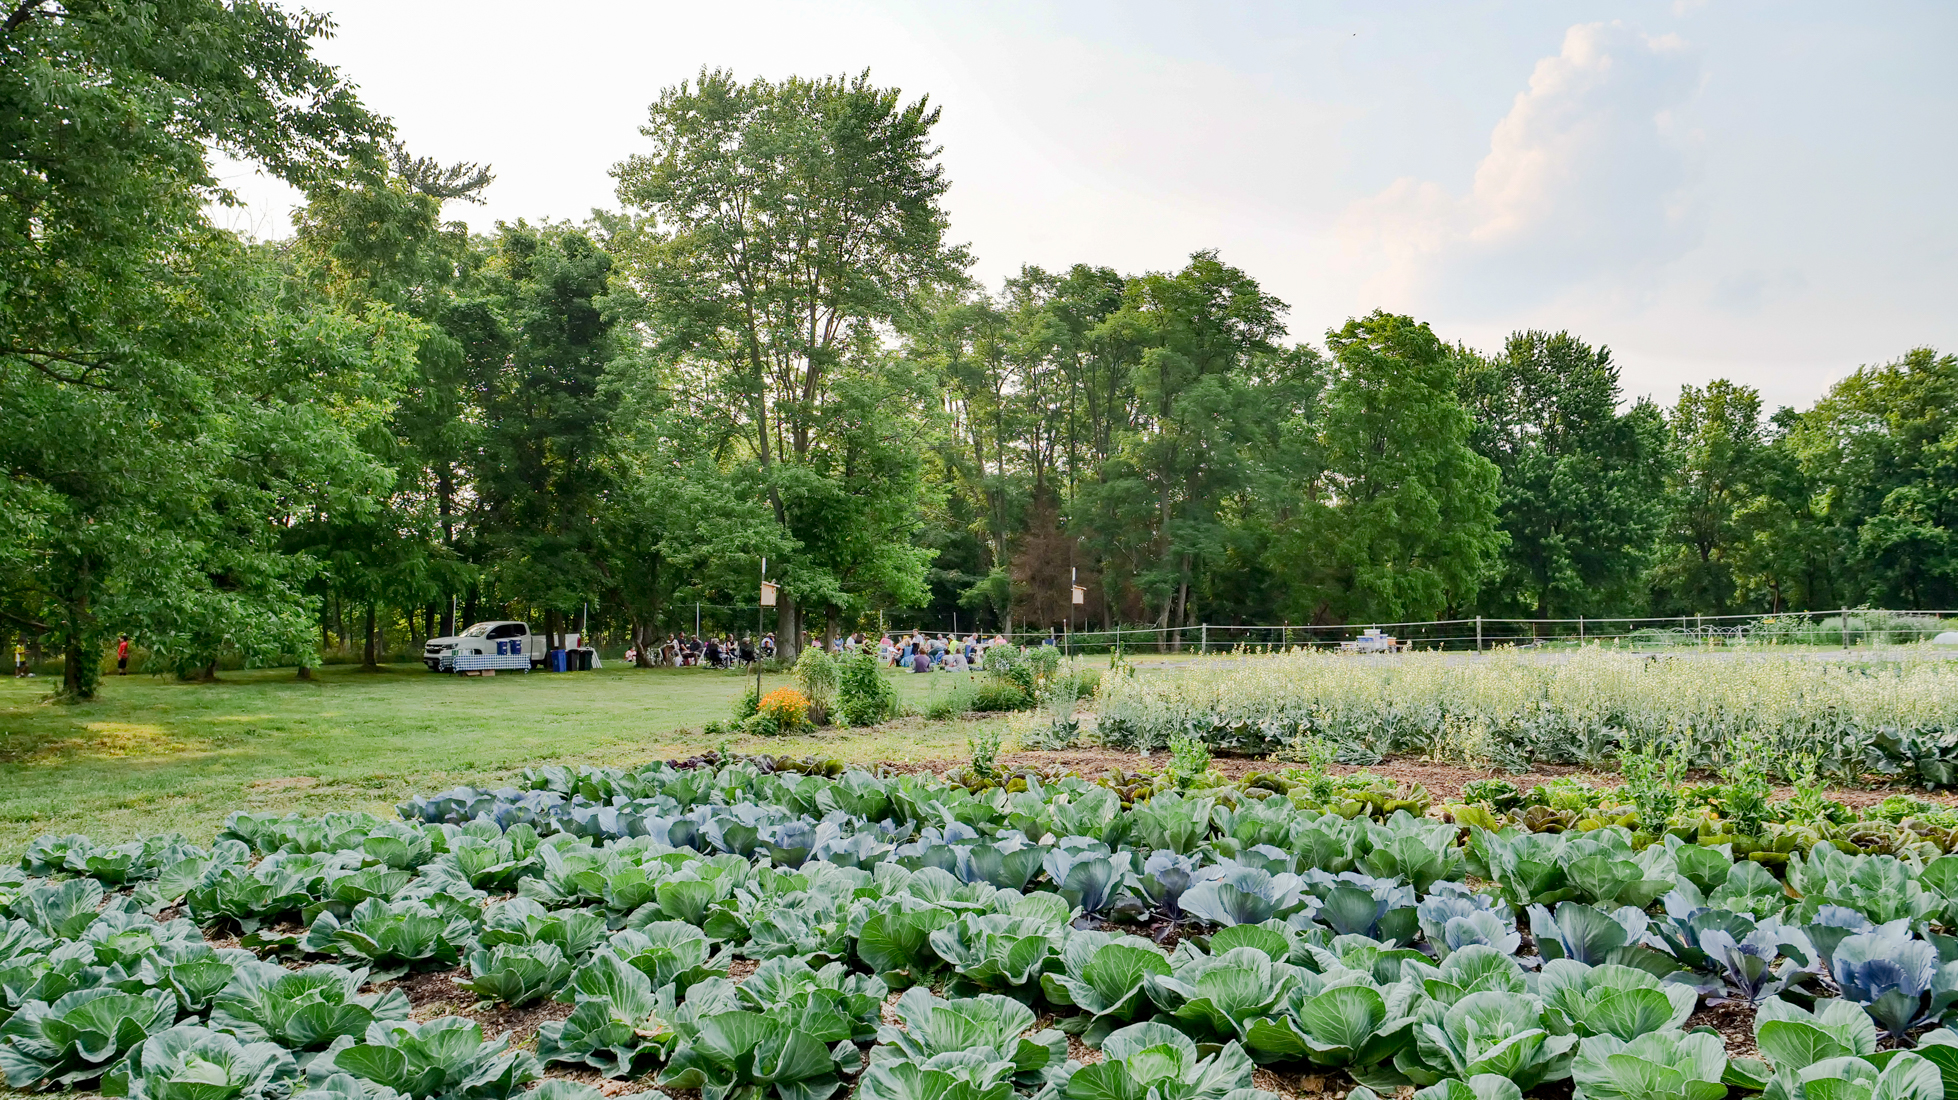 Garden field of brassica plants with people having a picnic in background